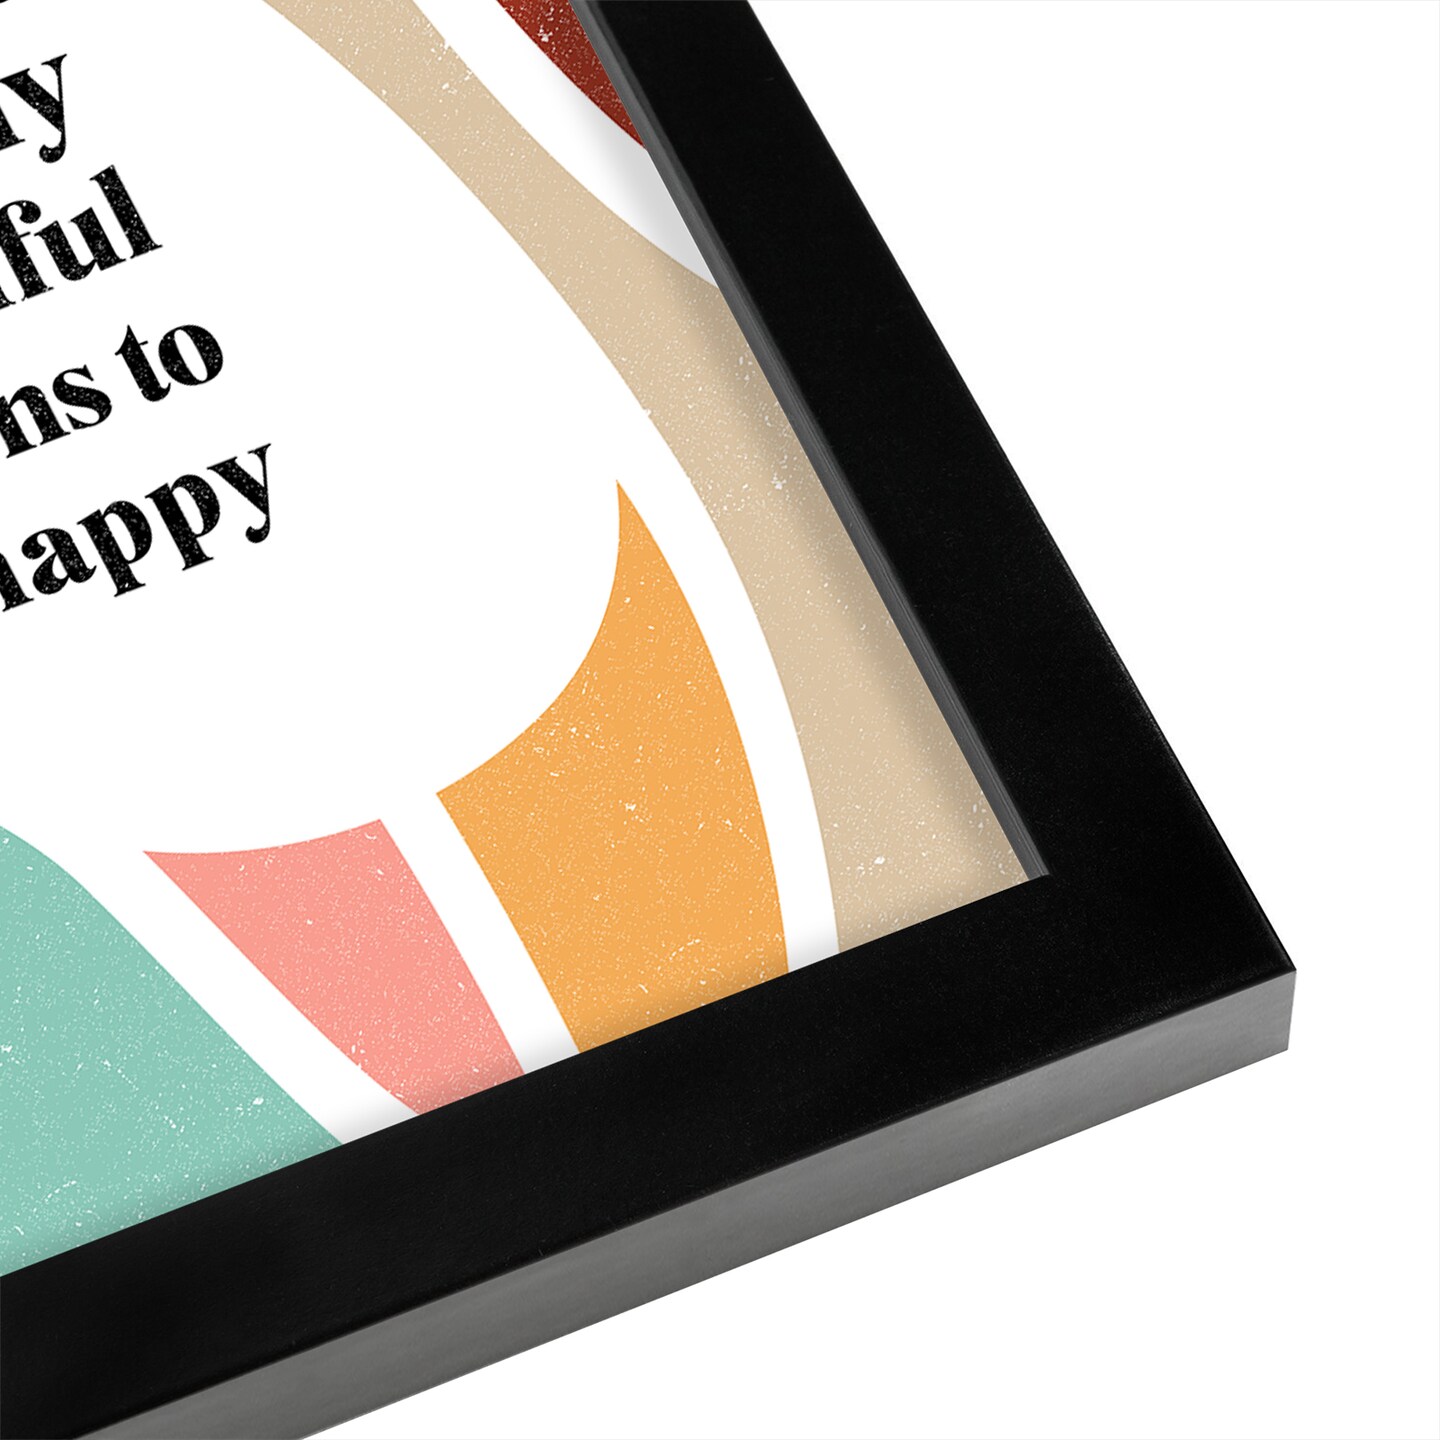 There Are So Many Beautiful Reasons To Be Happy by Elena David Frame  - Americanflat